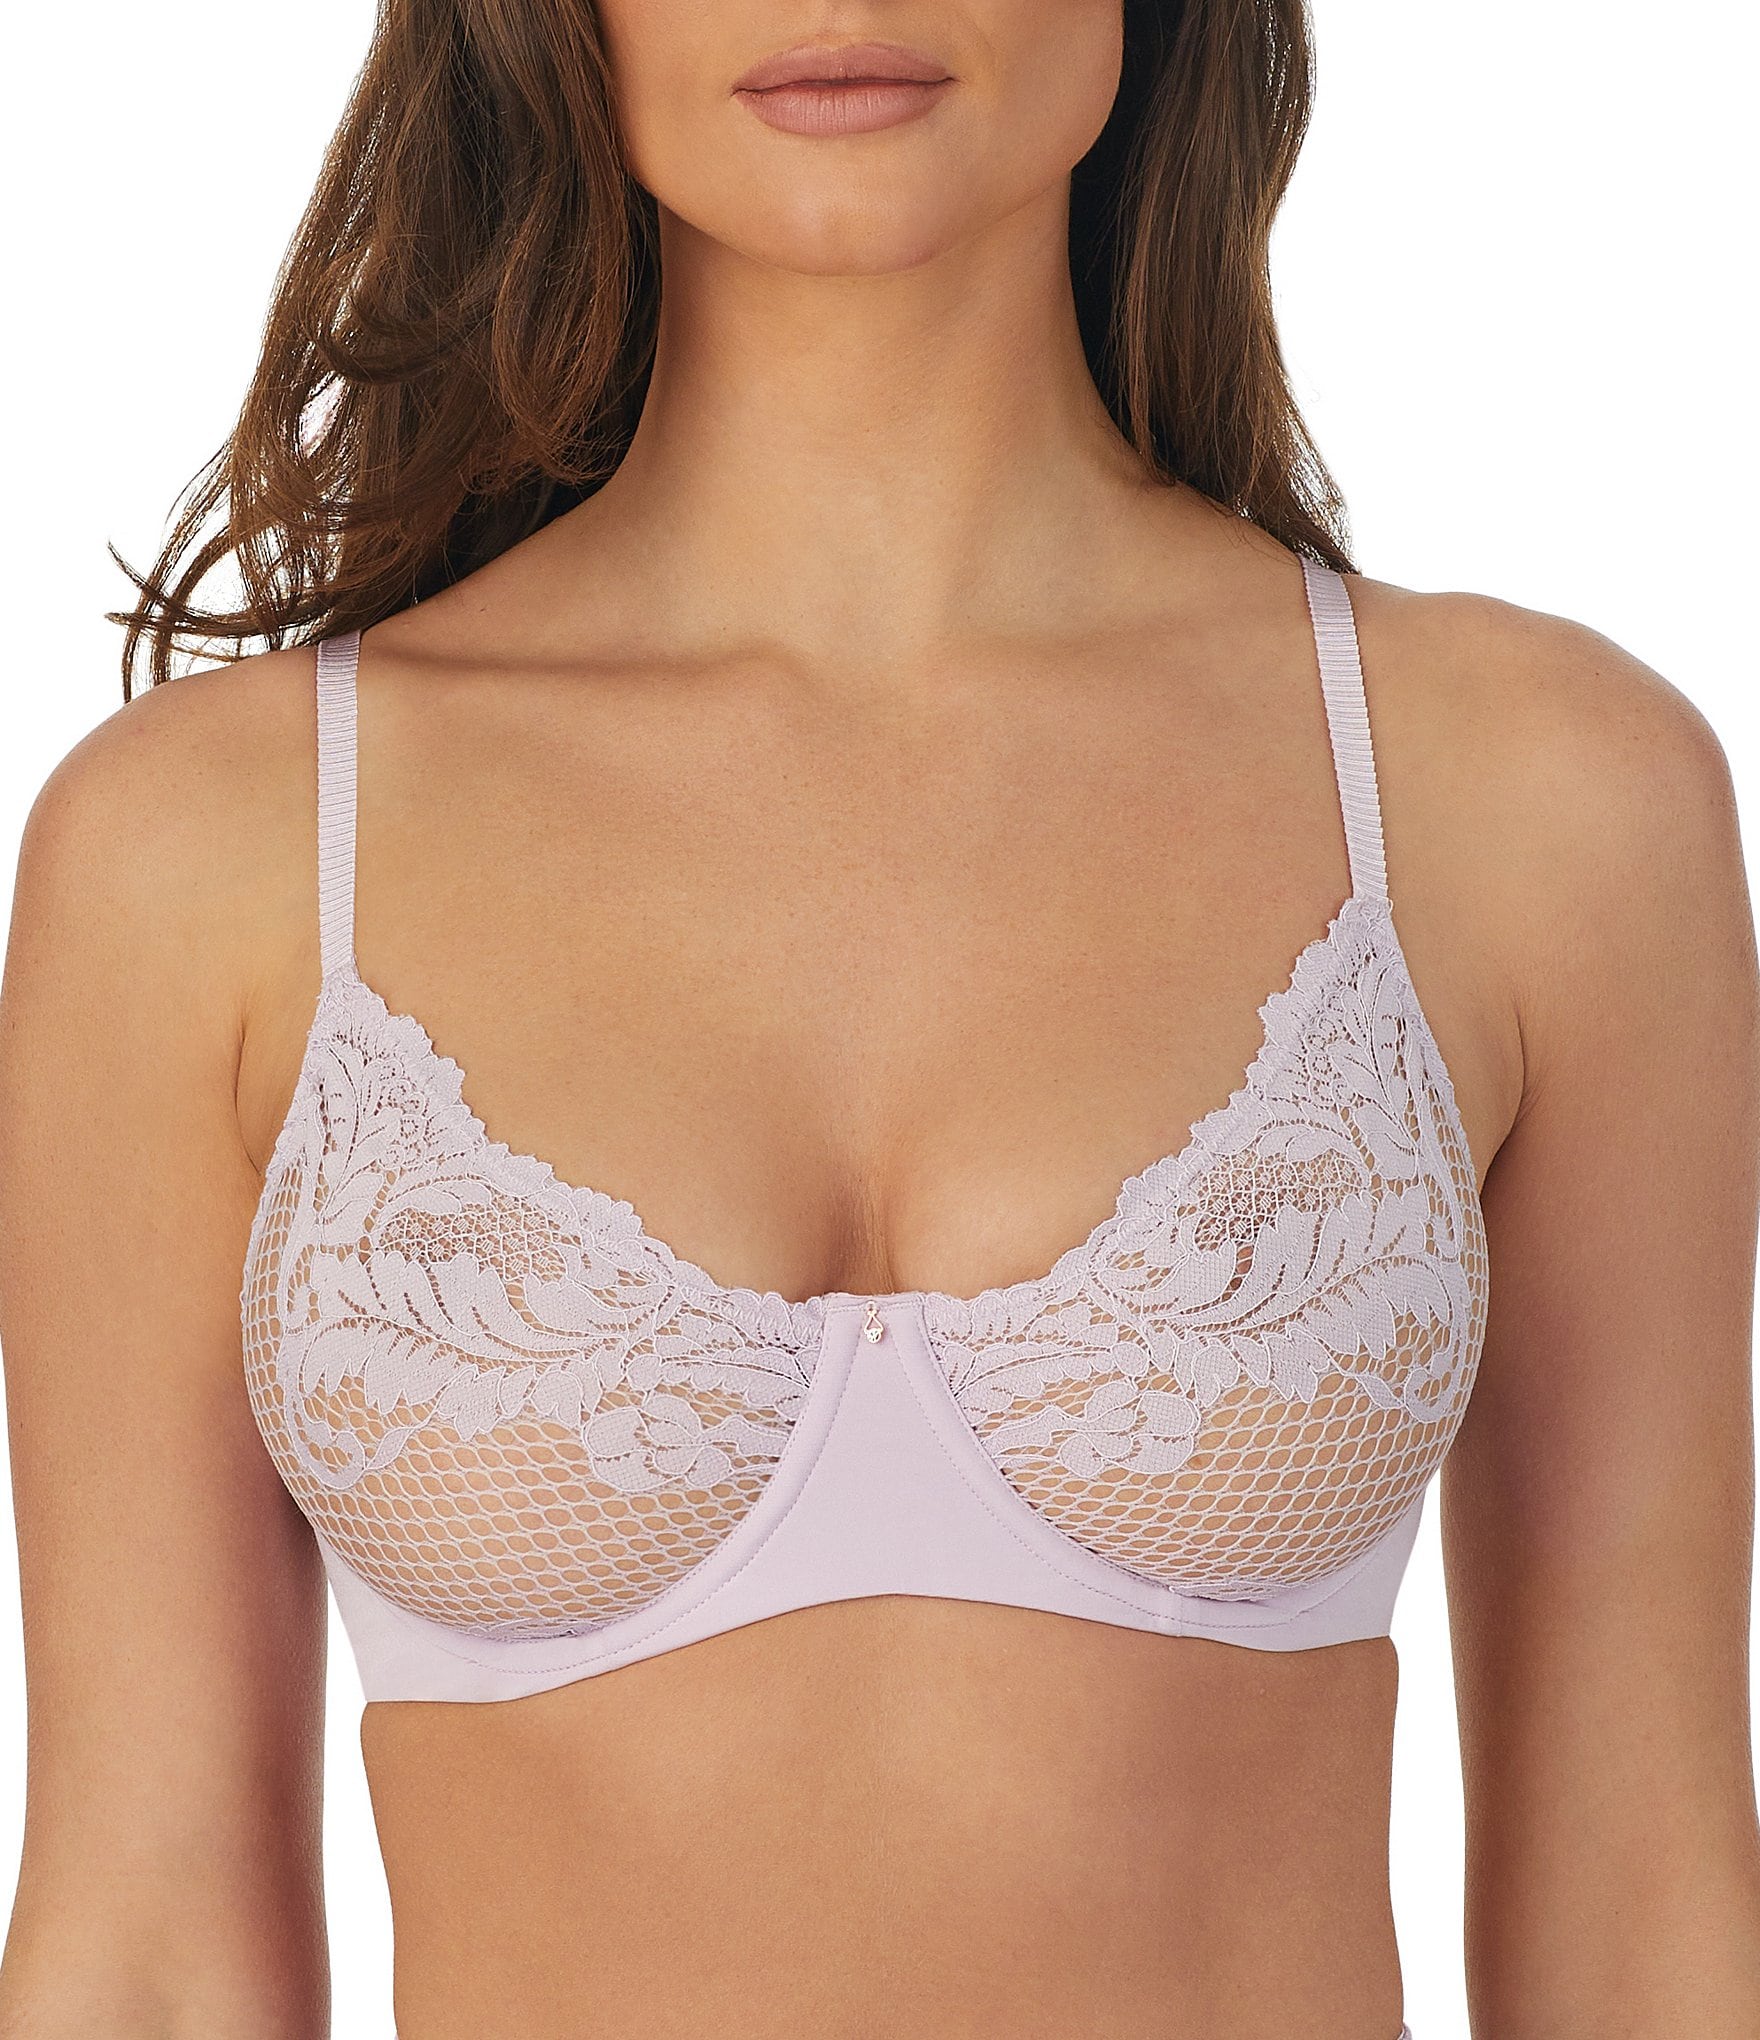 Le Mystere Lace Perfection Smoother Underwire Bra EU Szs E to H